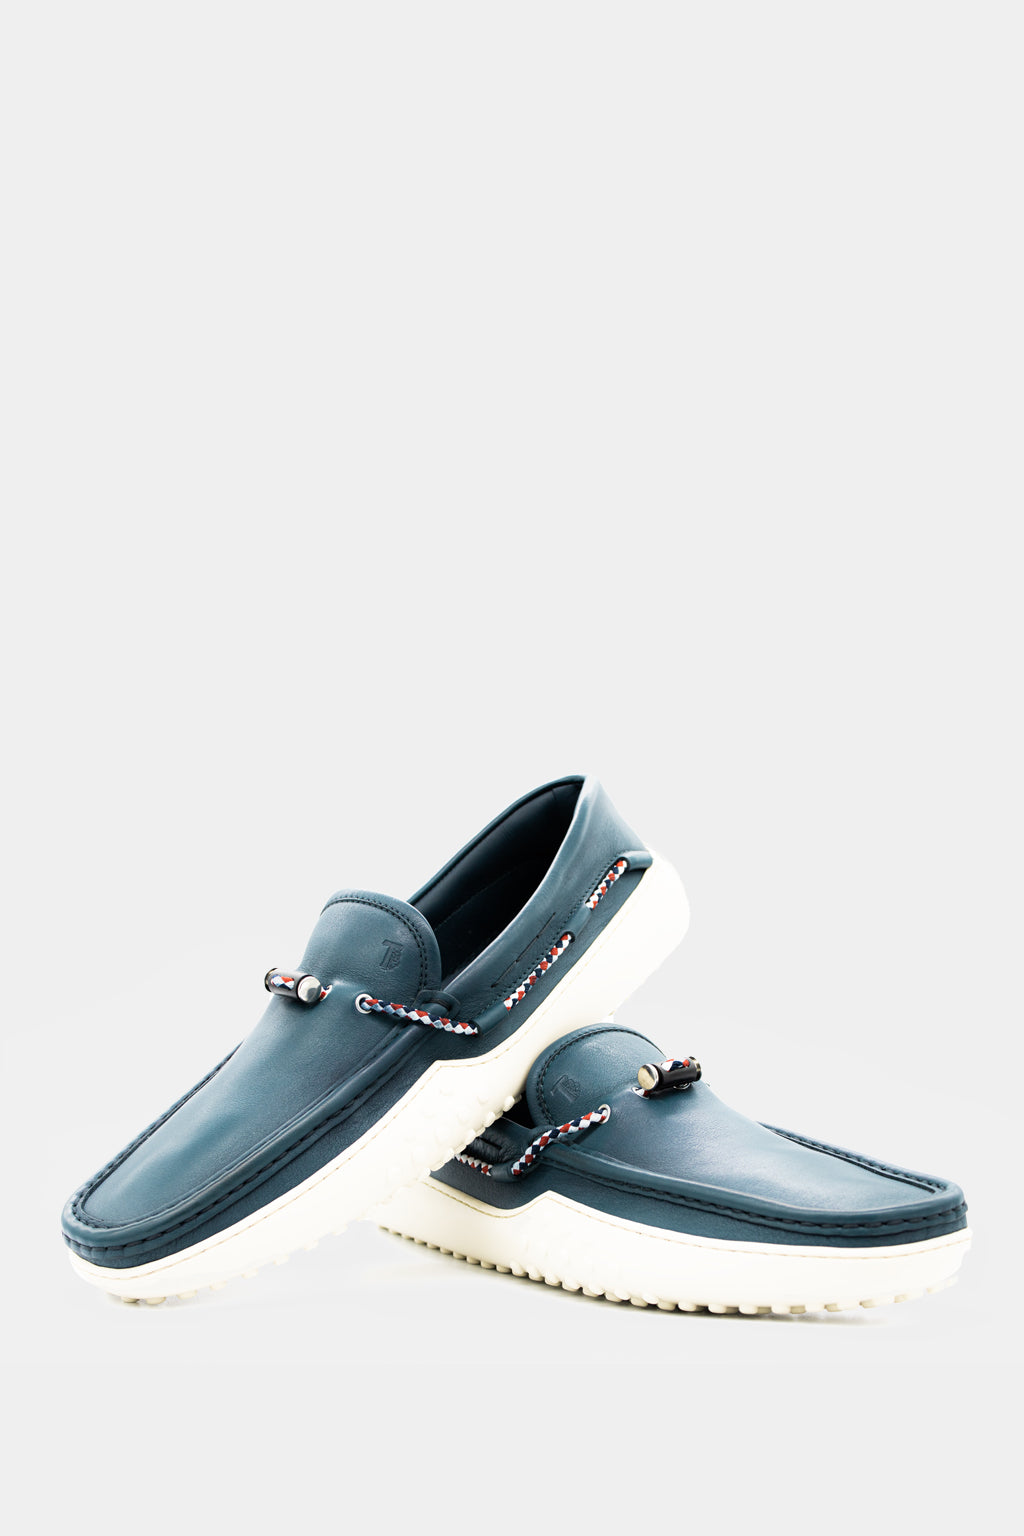 Tod's - Men's Light Blue Gommino Leather Loafers